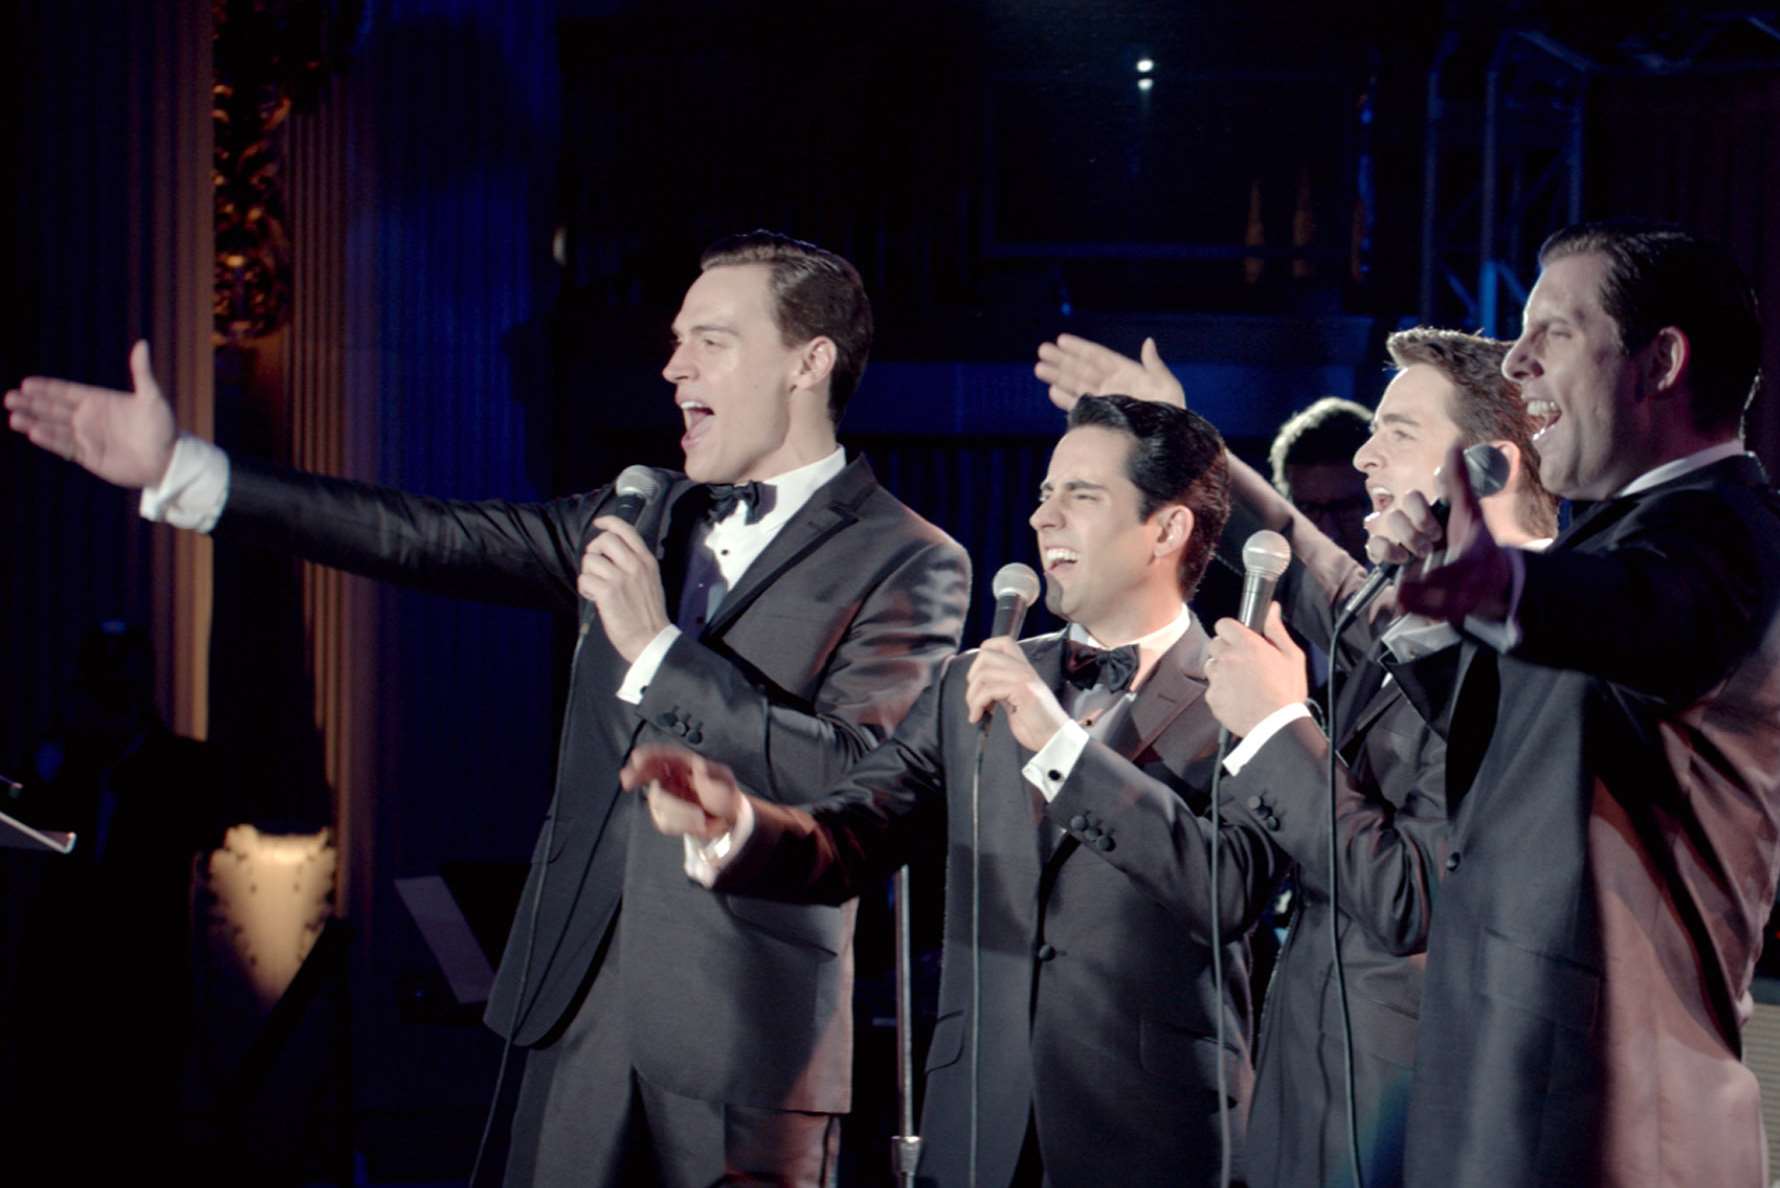 Jersey Boys, with John Lloyd Young as Frankie Valli, Vincent Piazza as Tommy DeVito, Erich Bergen as Bob Gaudio and Michael Lomenda as Nick Massi. Picture: PA Photo/Warner Brothers